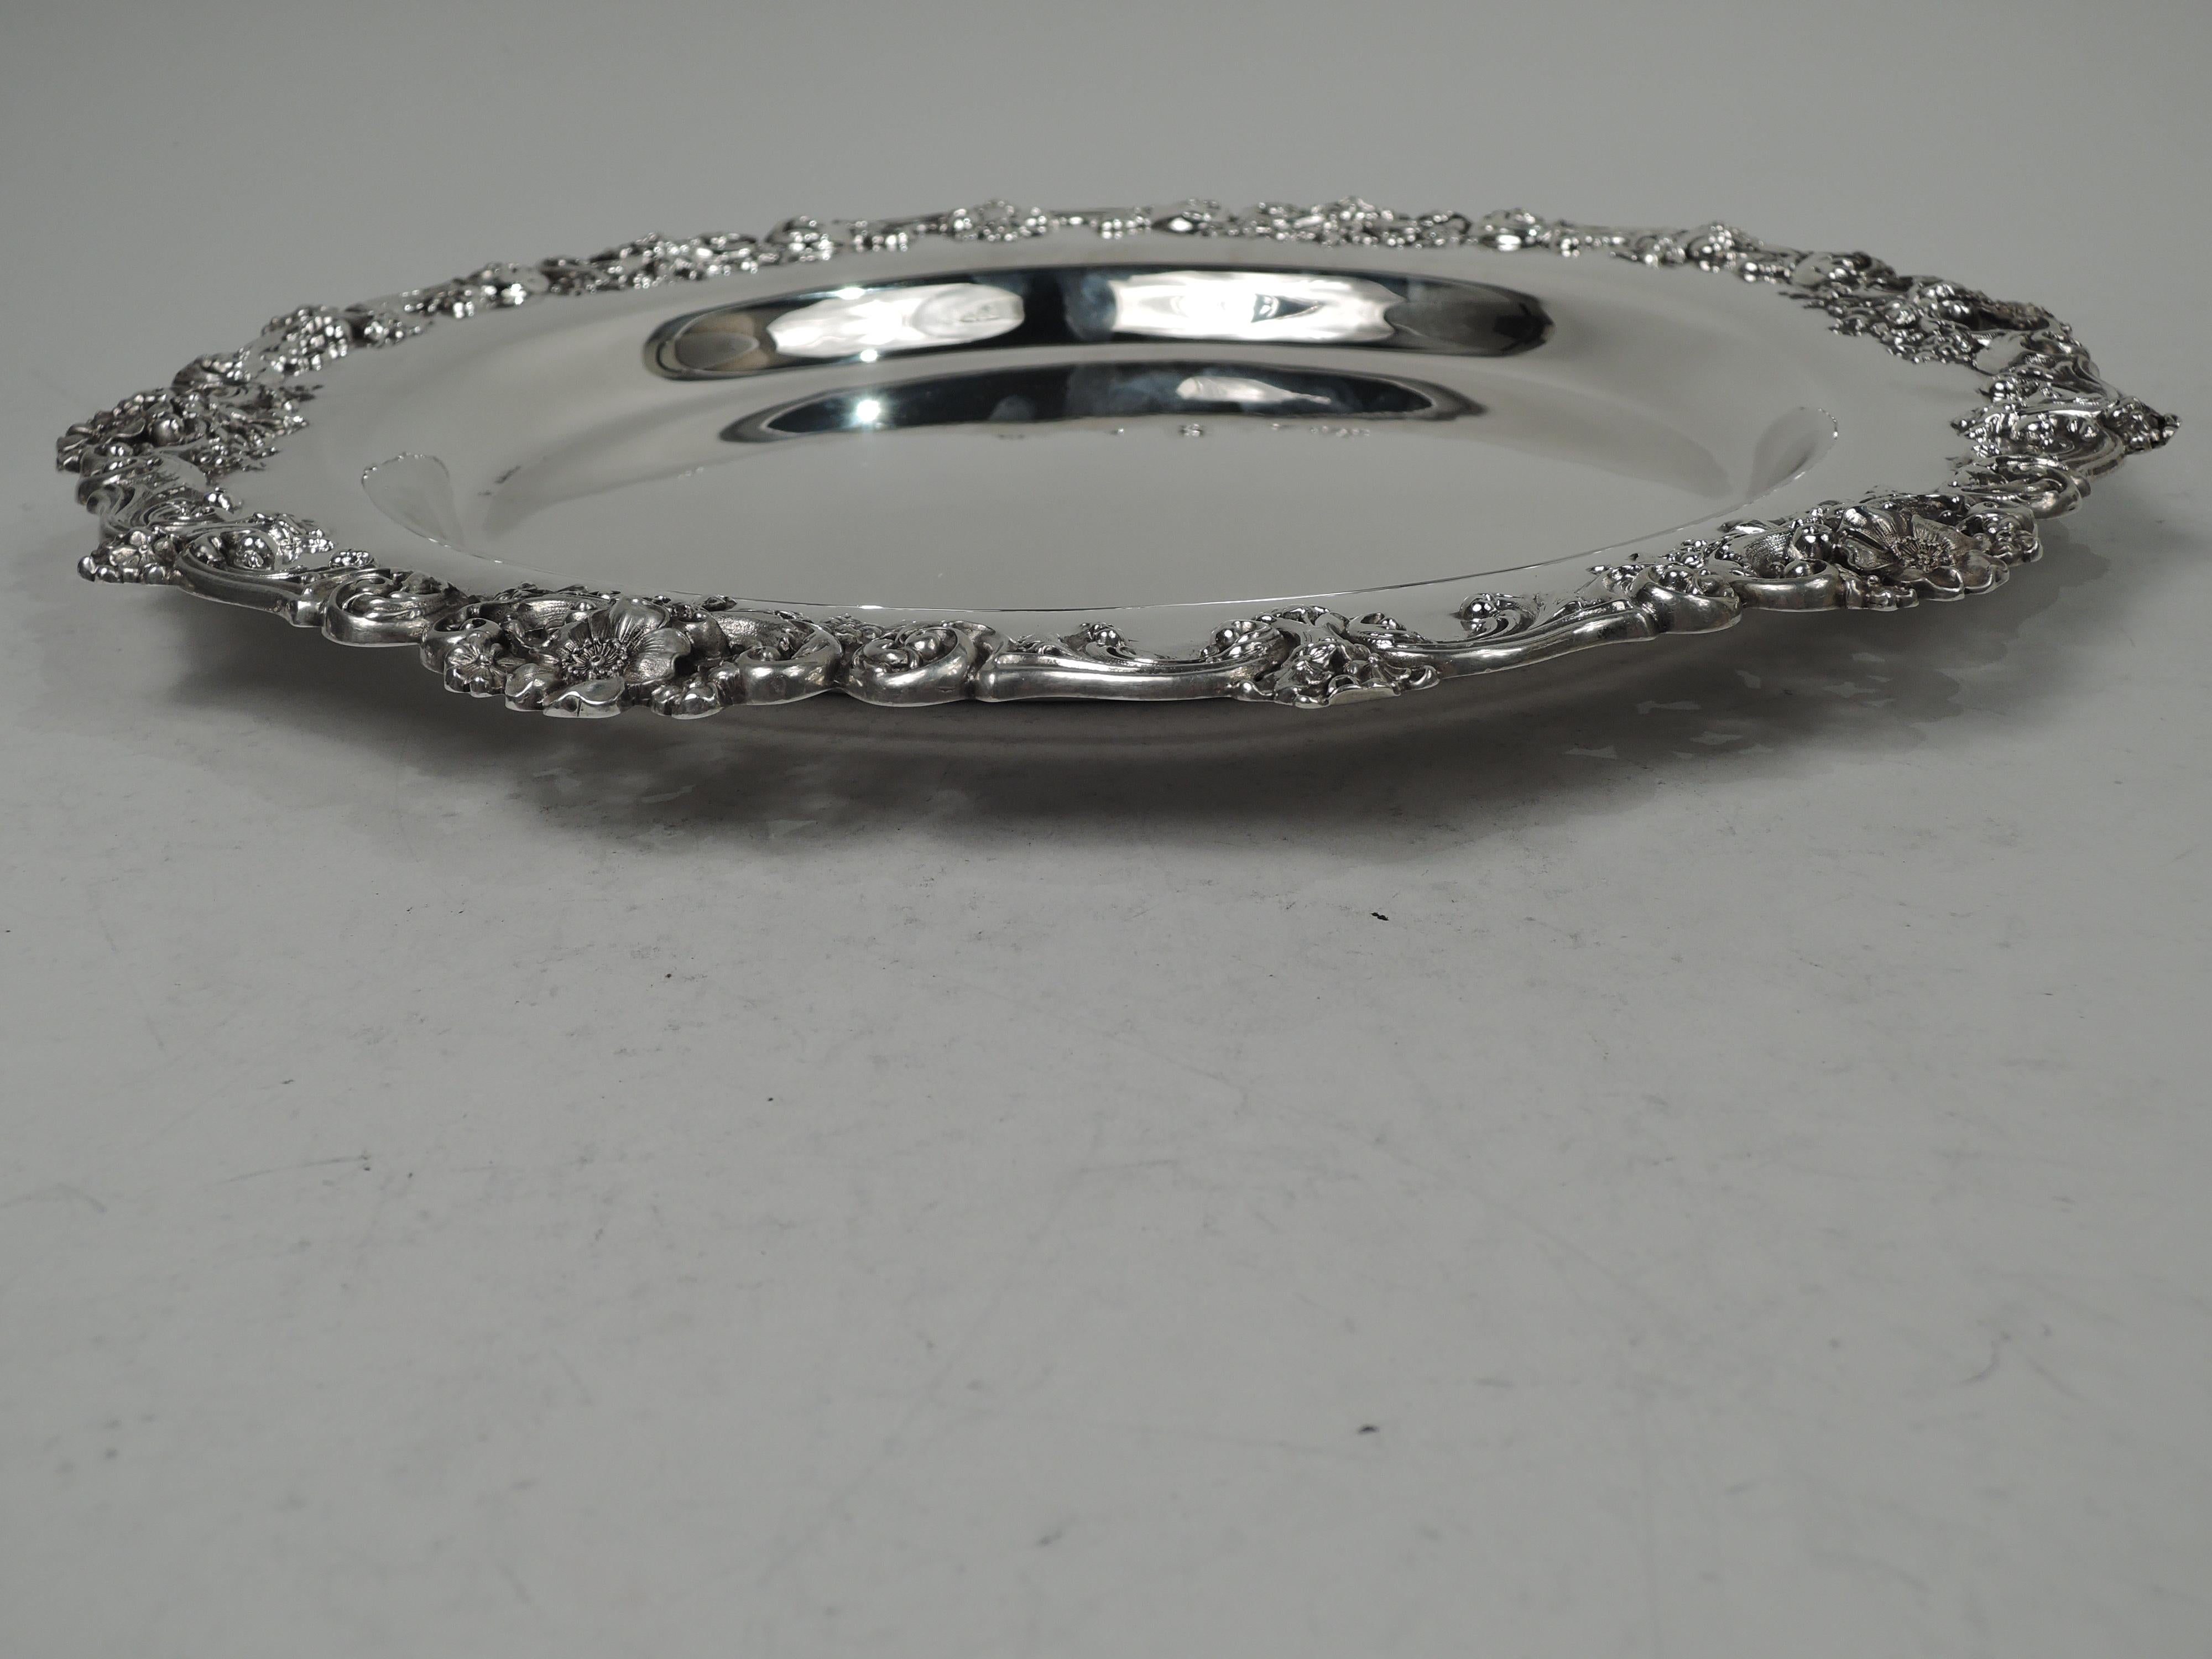 Pretty Victorian sterling silver tray. Made by Theodore B. Starr in New York, ca 1890. Round with deep well. Applied cast rim with leafing scrollwork and flowers. Fully marked including maker’s stamp and no. 3868X. Weight: 26.3 troy ounces. 